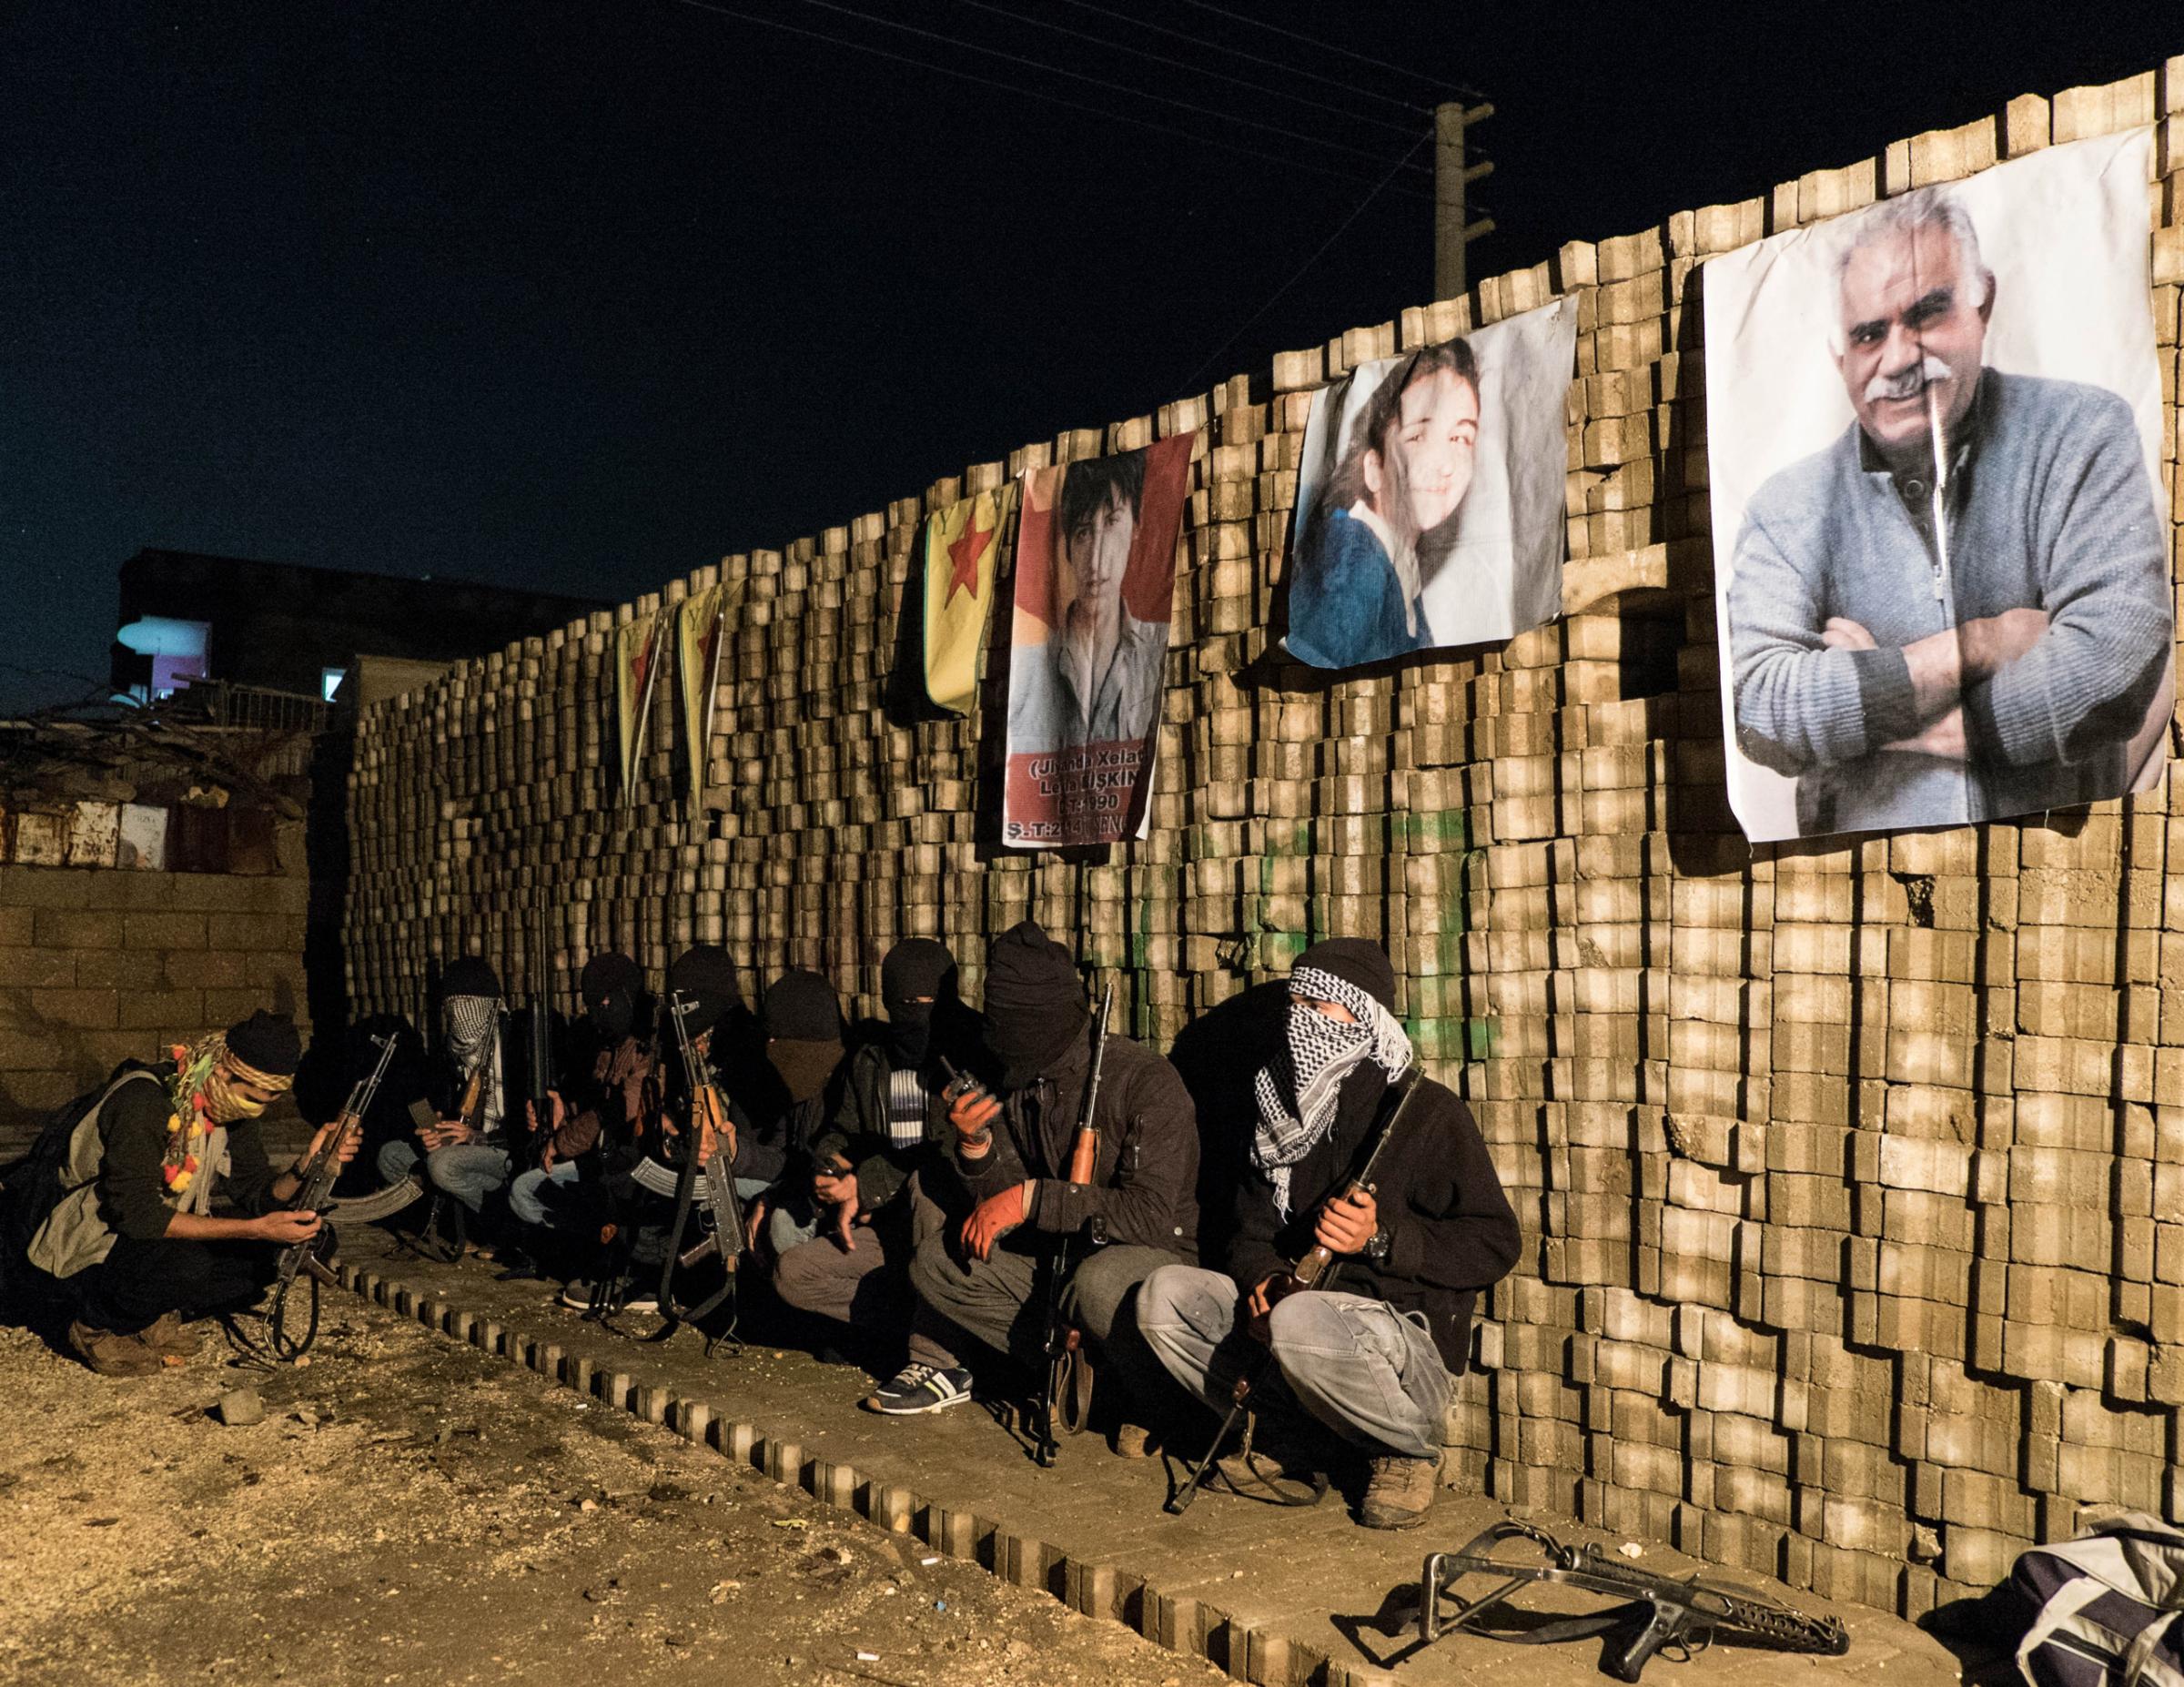 IDIL, TURKEY - OCTOBER 30, 2015: Kurdish youth militia YPS (Defense Forces of Civilians) hold their position behind a barricade and surveil an entrance to the Turgut Ozal autonomous neighborhood of Idil, a town in the Sirnak province. Several neighborhoods in Idil have declared autonomy and built self-rules, with groups of young Kurds who have taken up arms and raise barricades to prevent the advances of the Turkish forces.